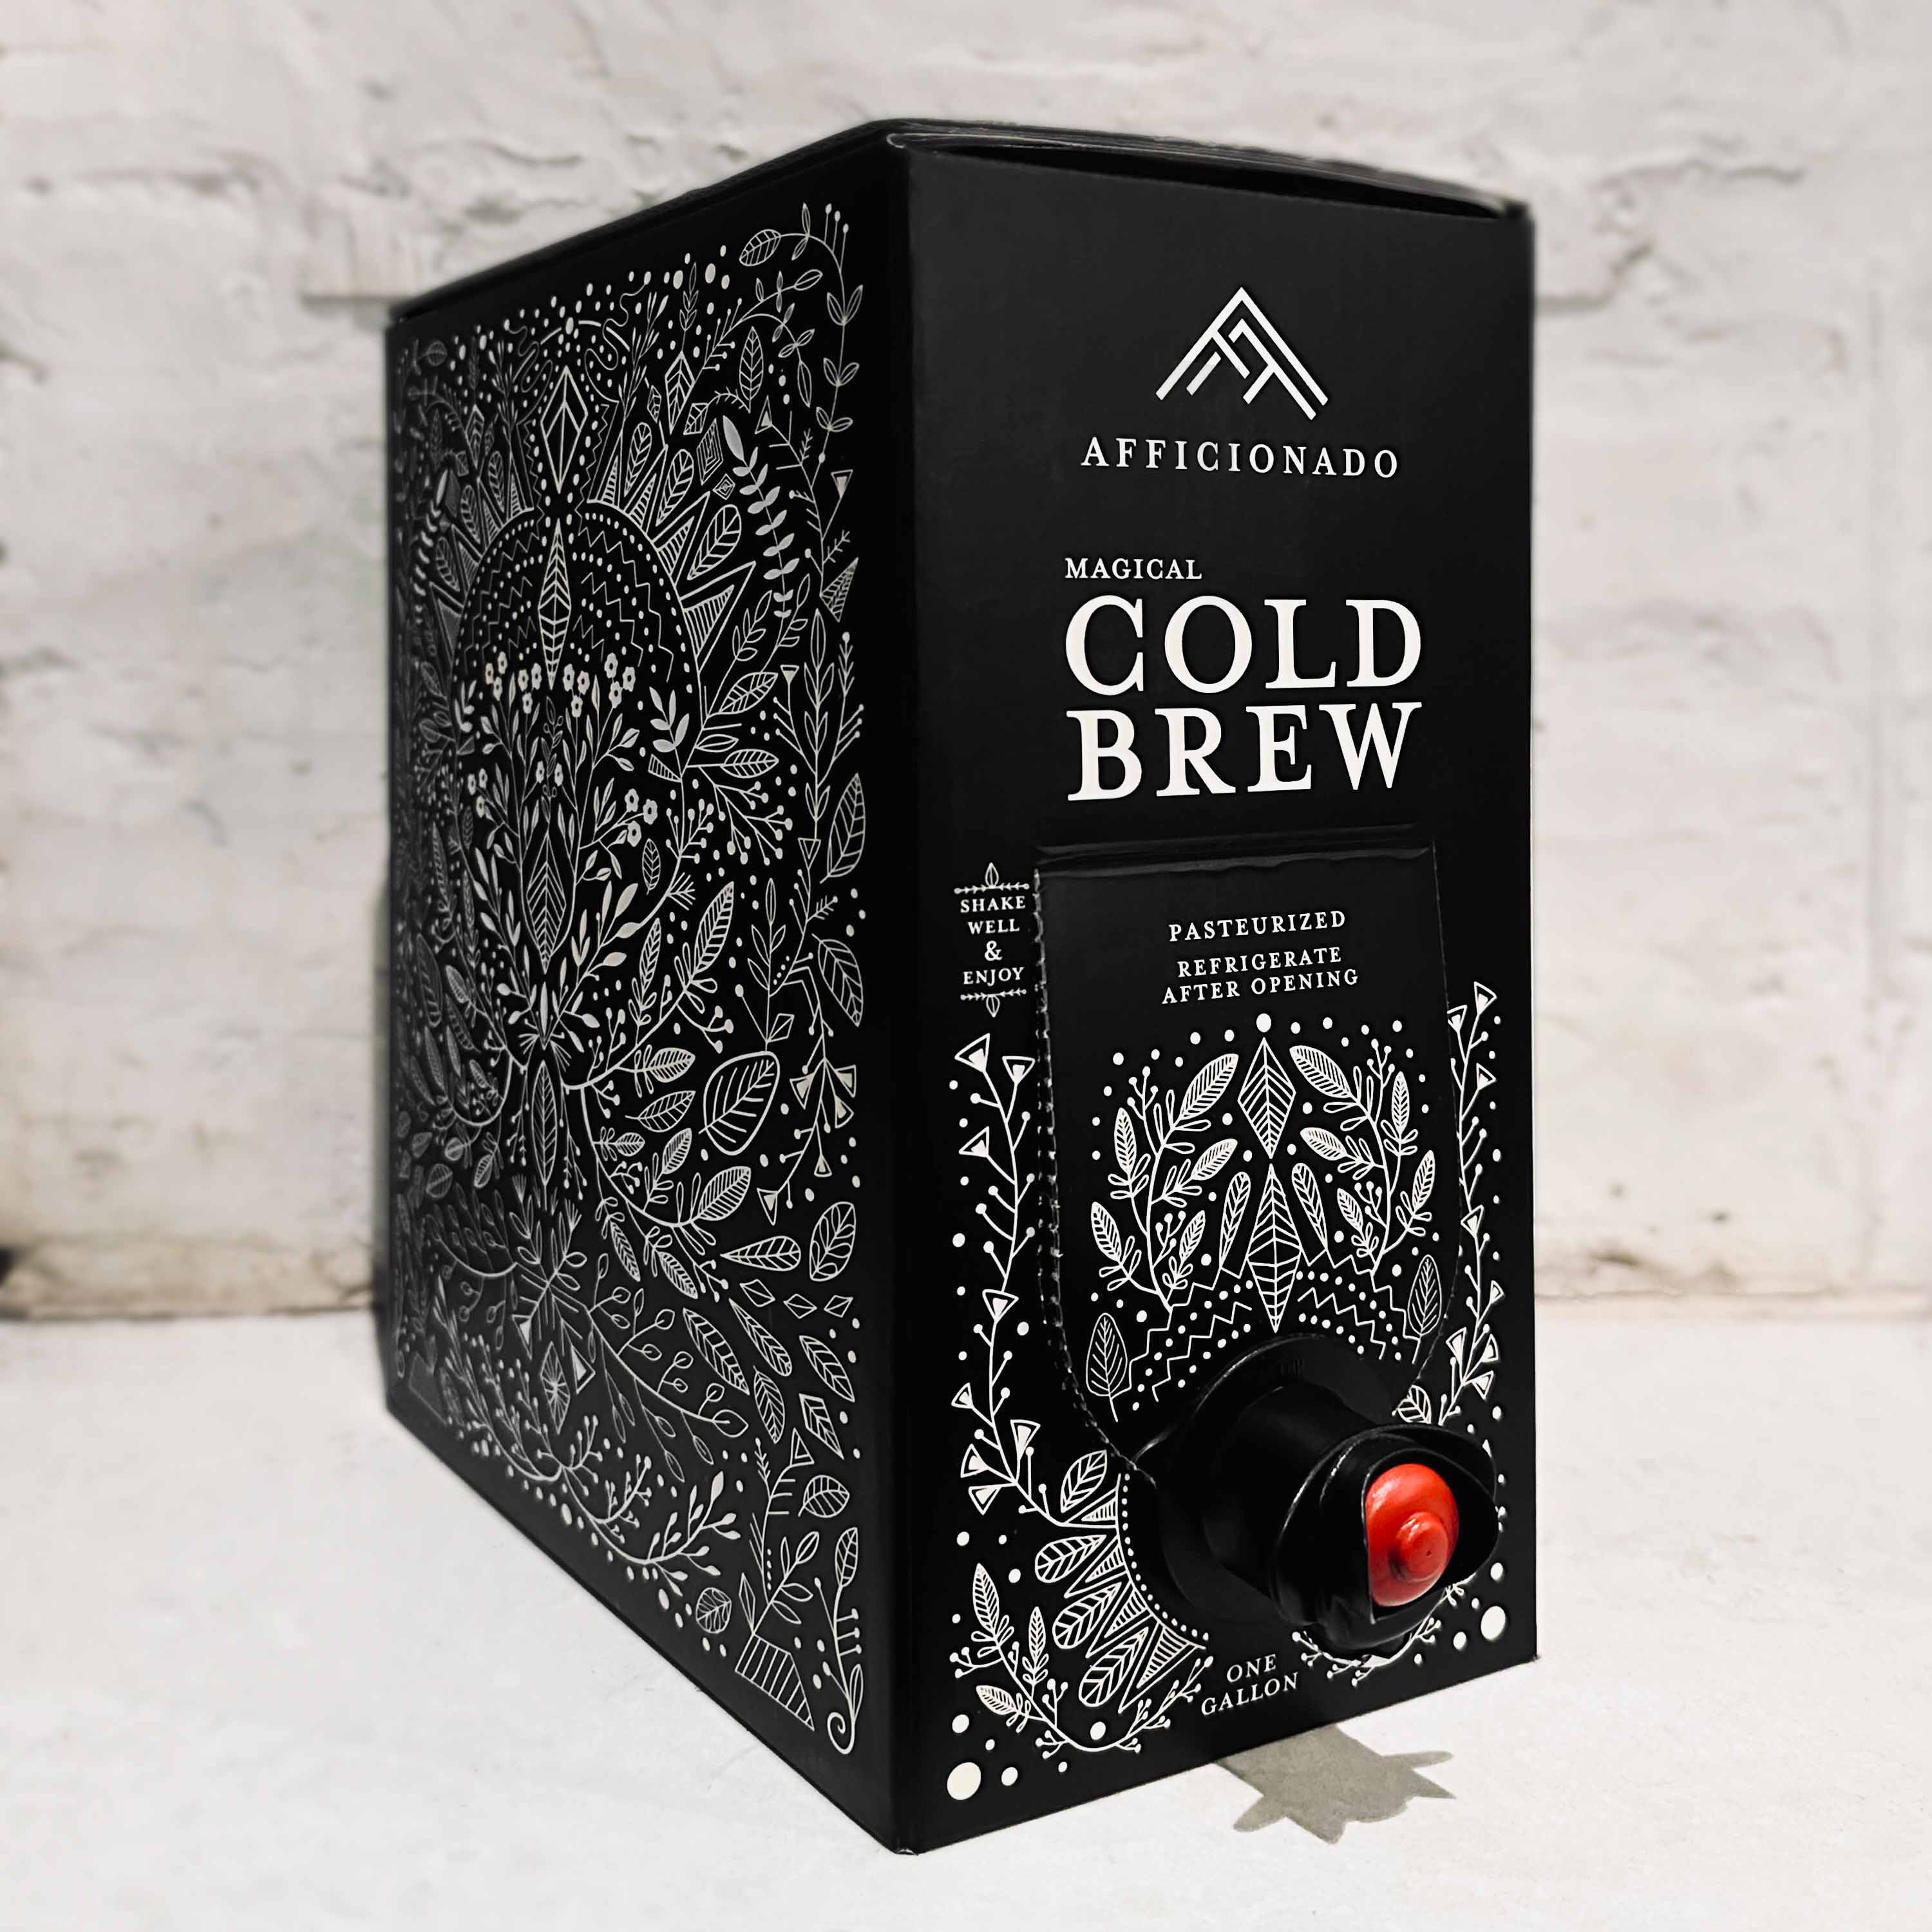 Magical Cold Brew Bag-in-Box (1G)